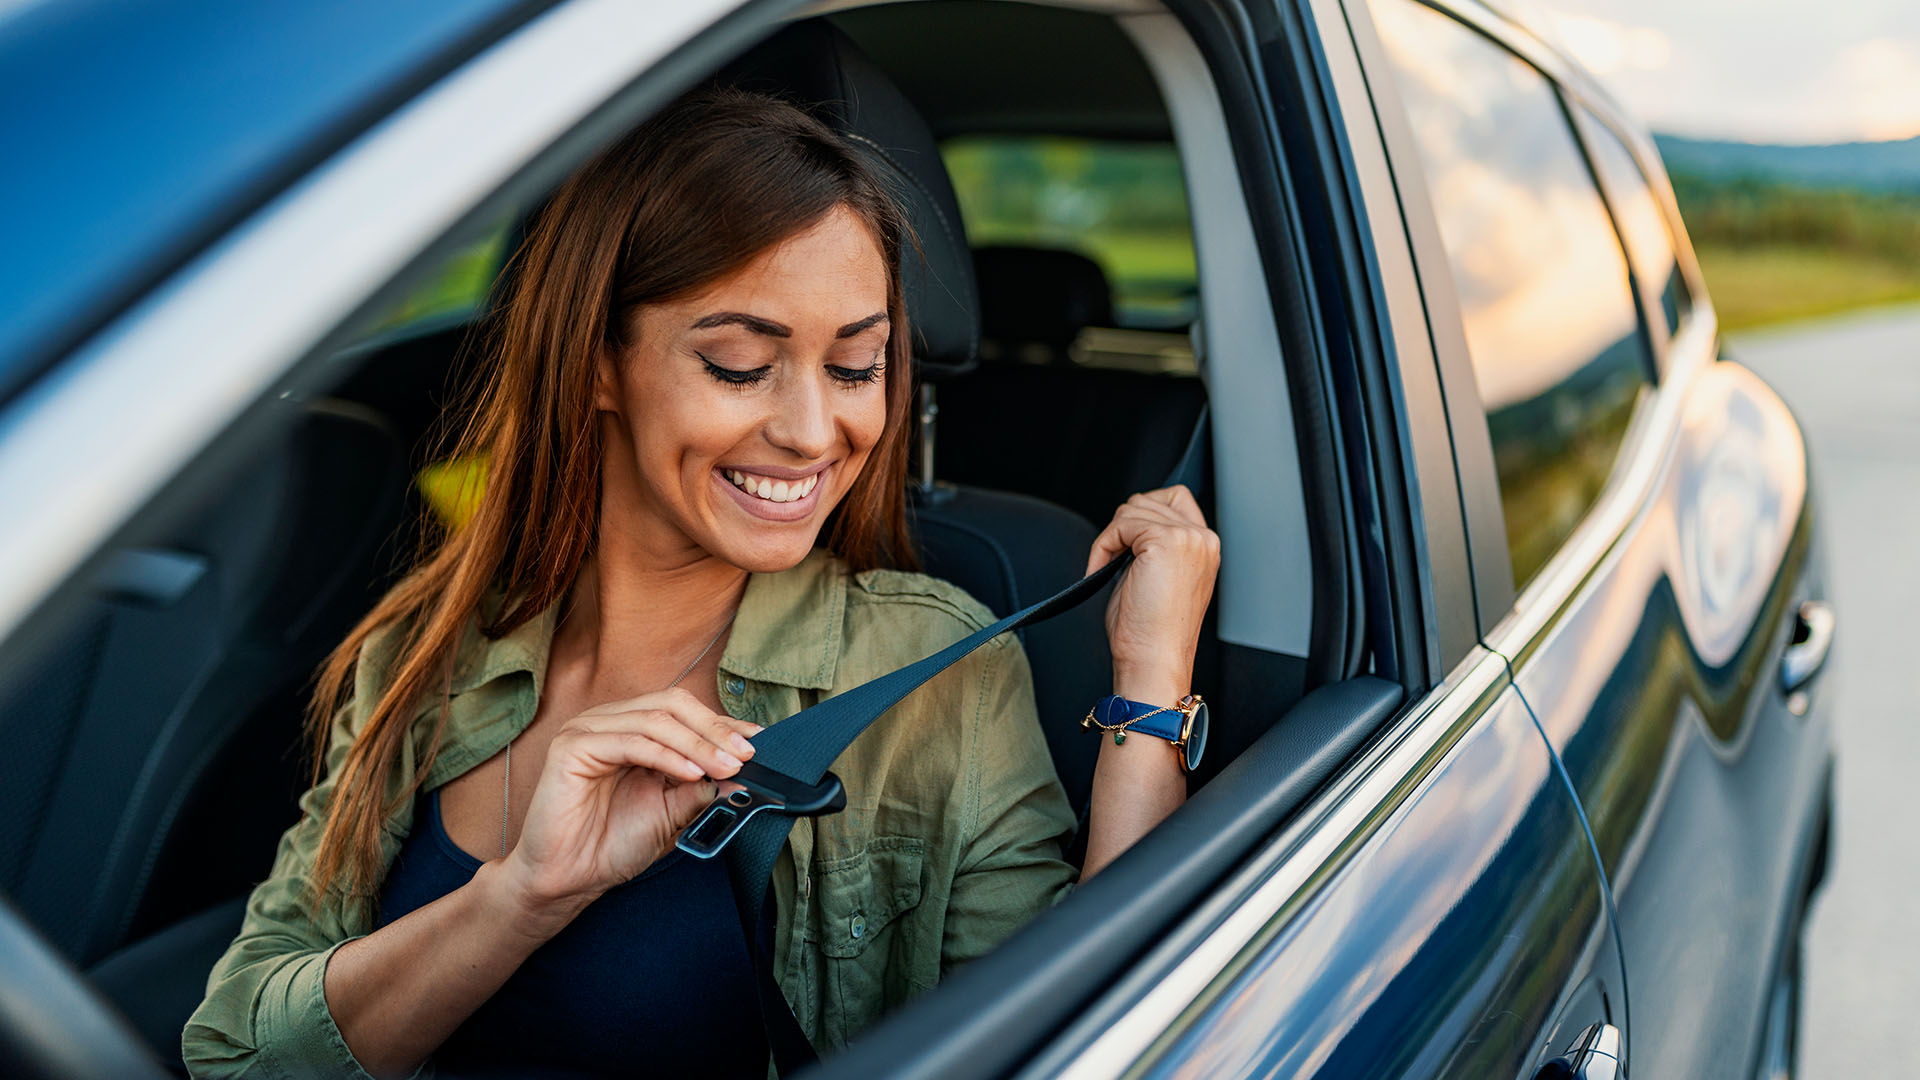 Driving Tips for All Ages | CPI Security Blog